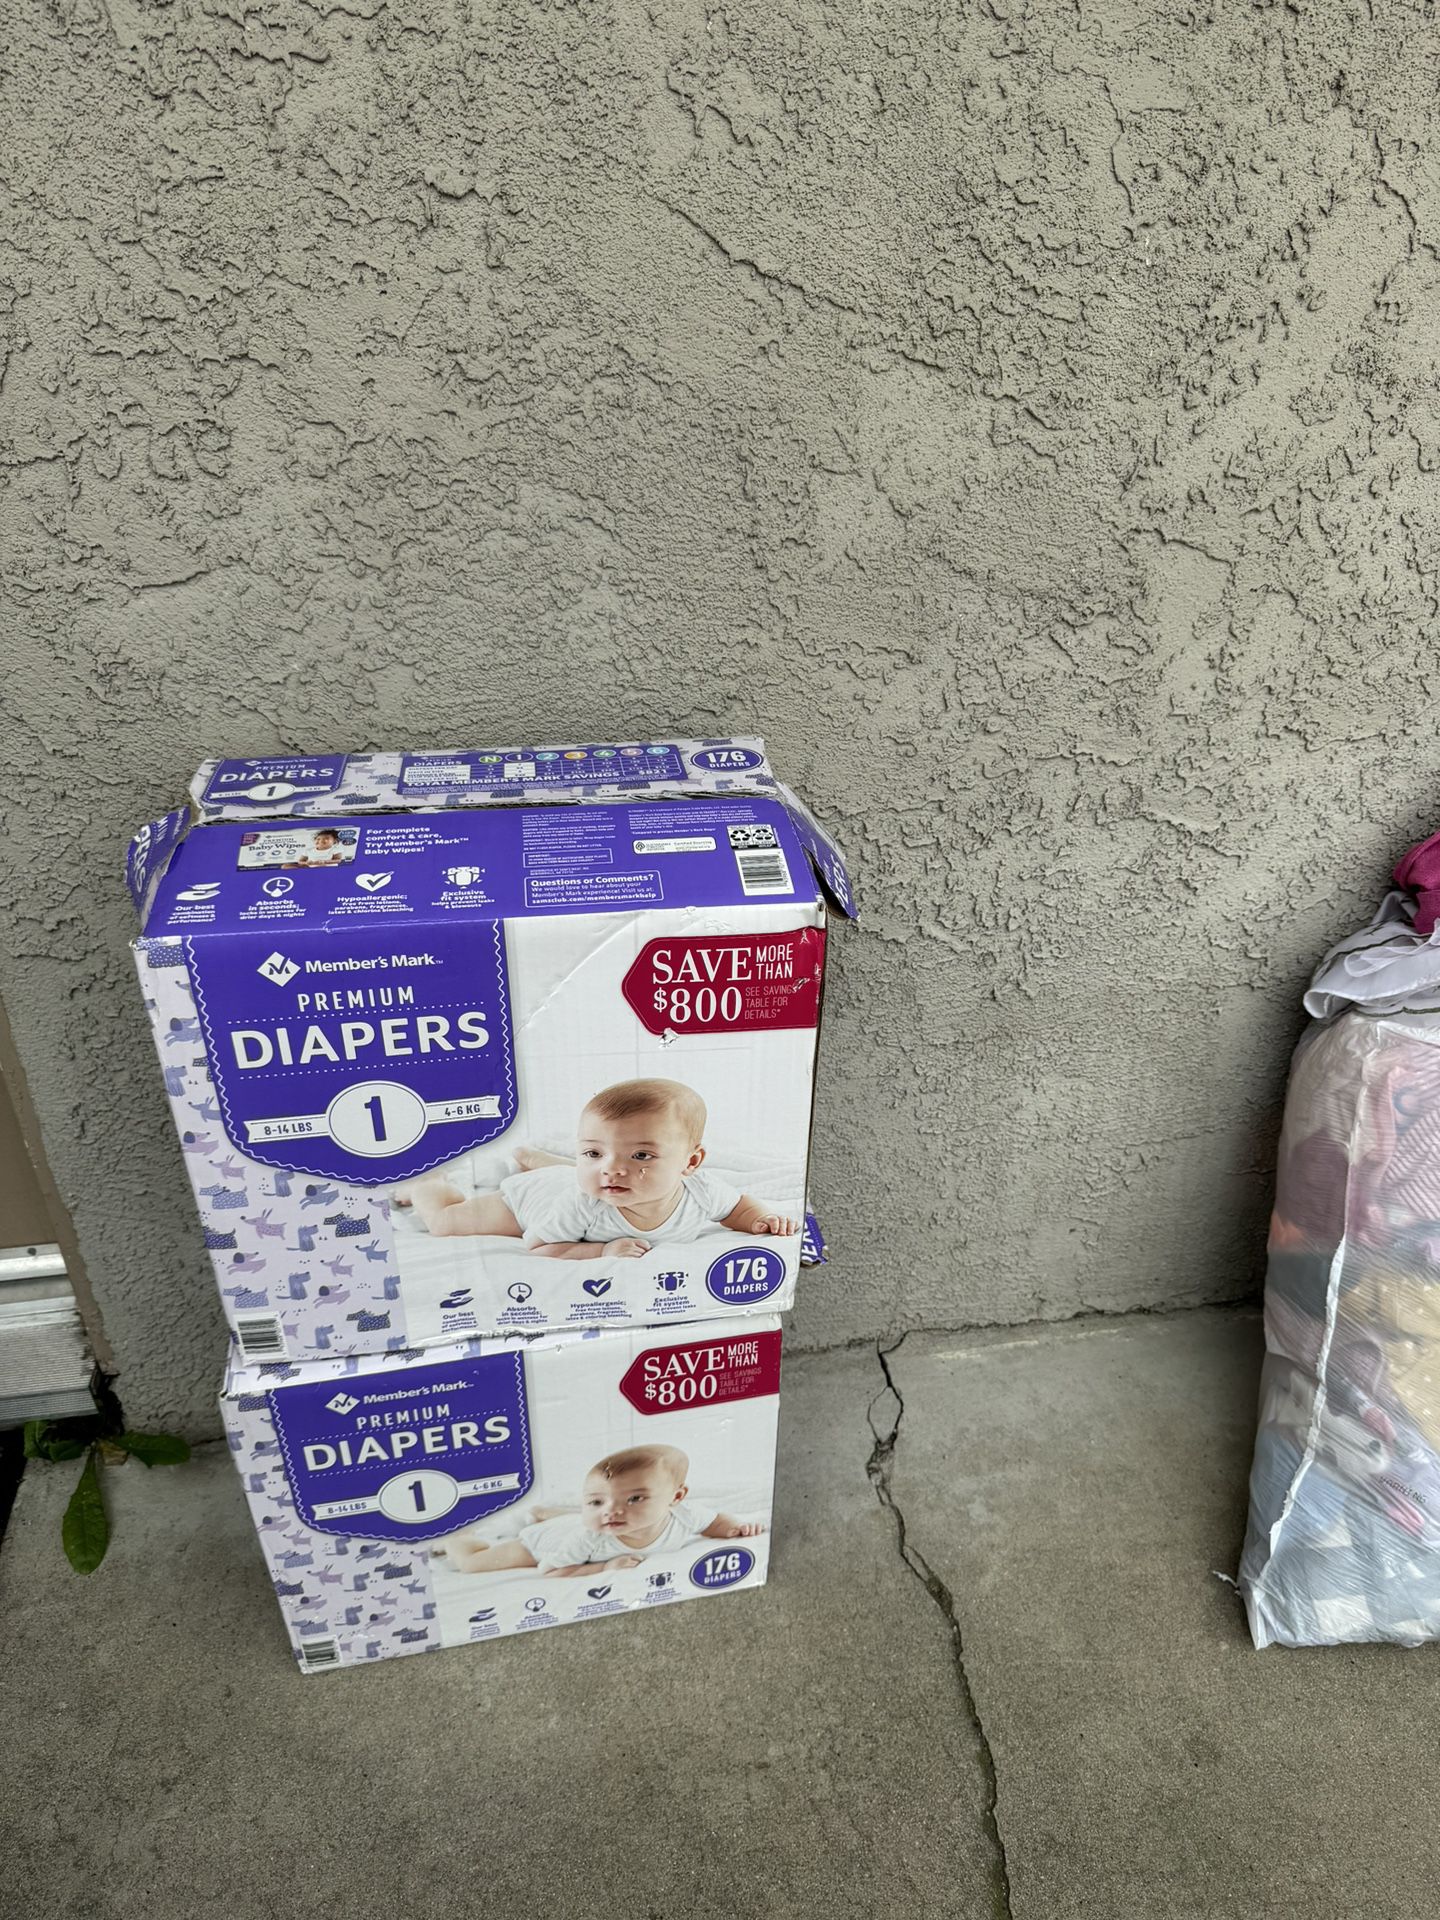 Diapers 2 For $30